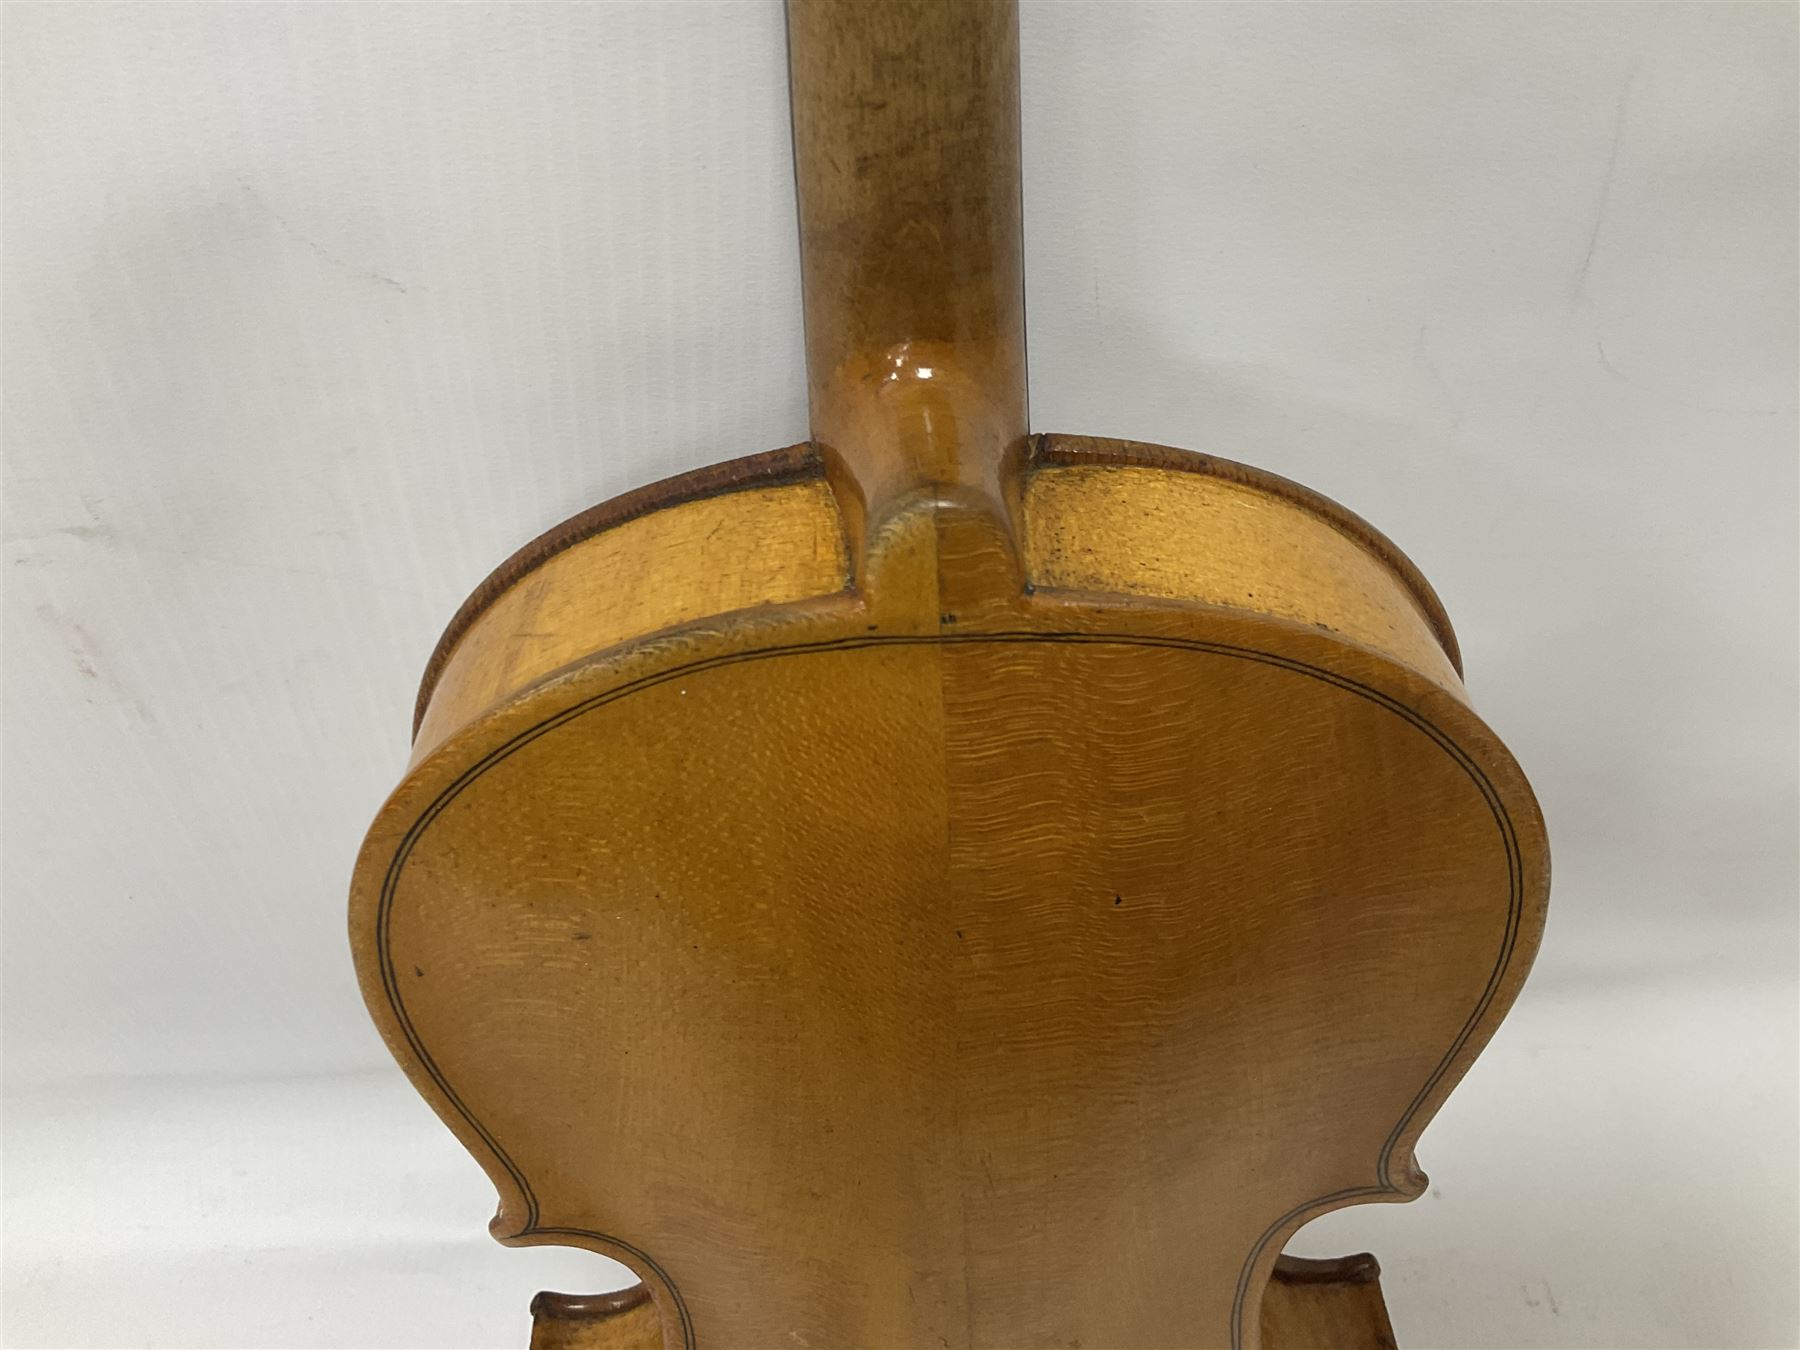 19th century 3/4 size violin in its original fitted wooden “coffin case” Overall length 53cm No bow - Image 14 of 16